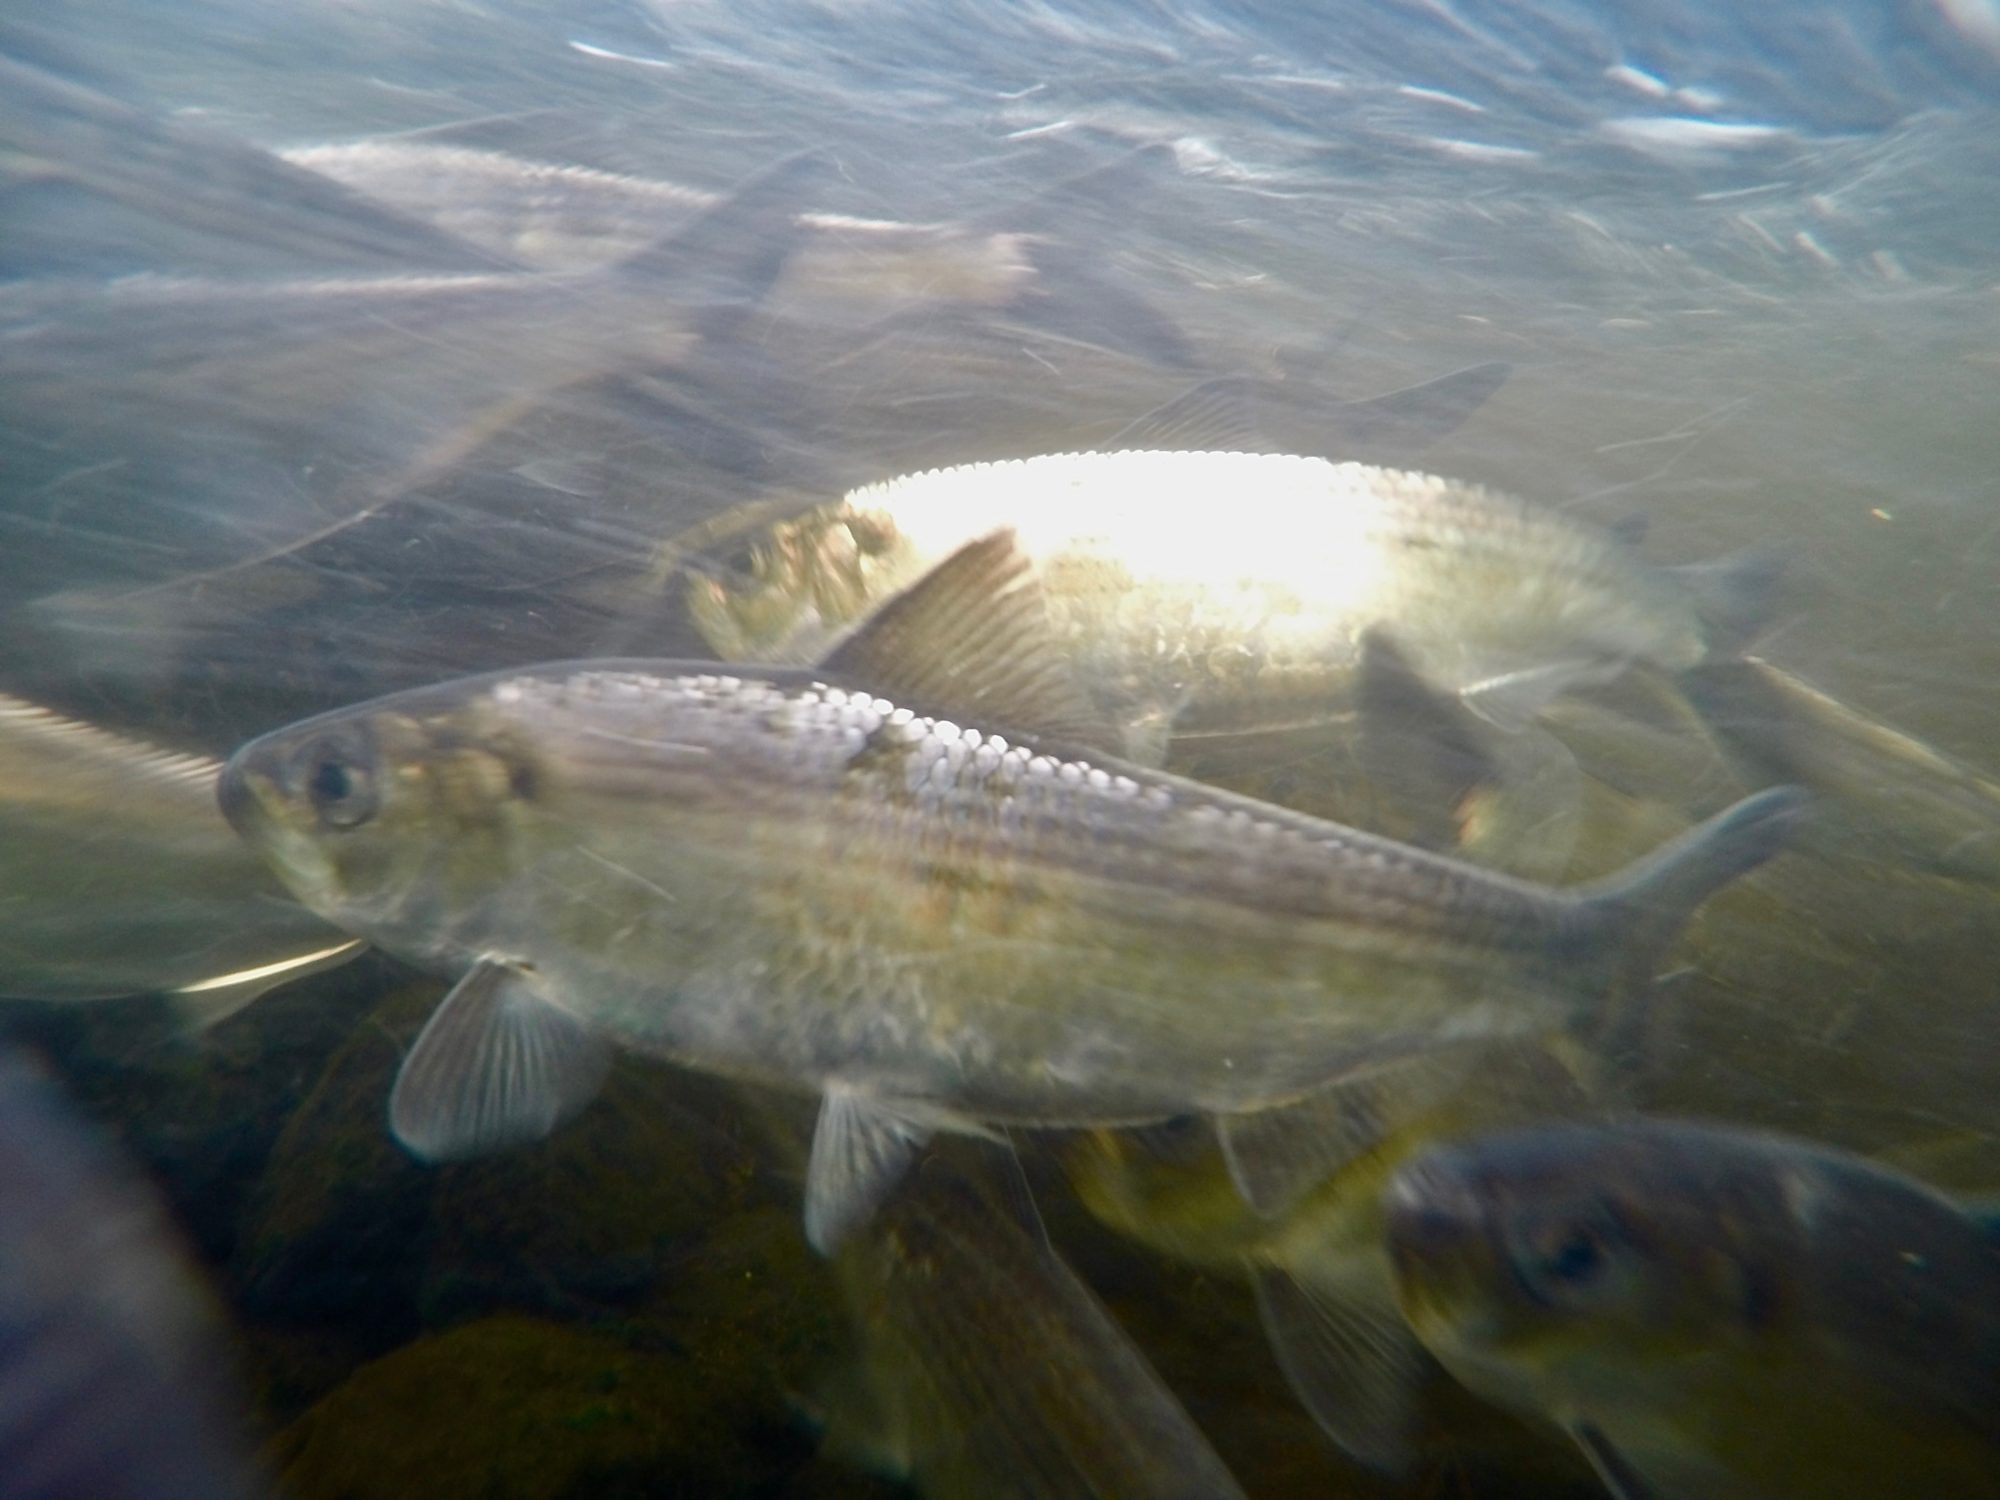 Alewives in the Peconic River. Photo by: Bryan Young